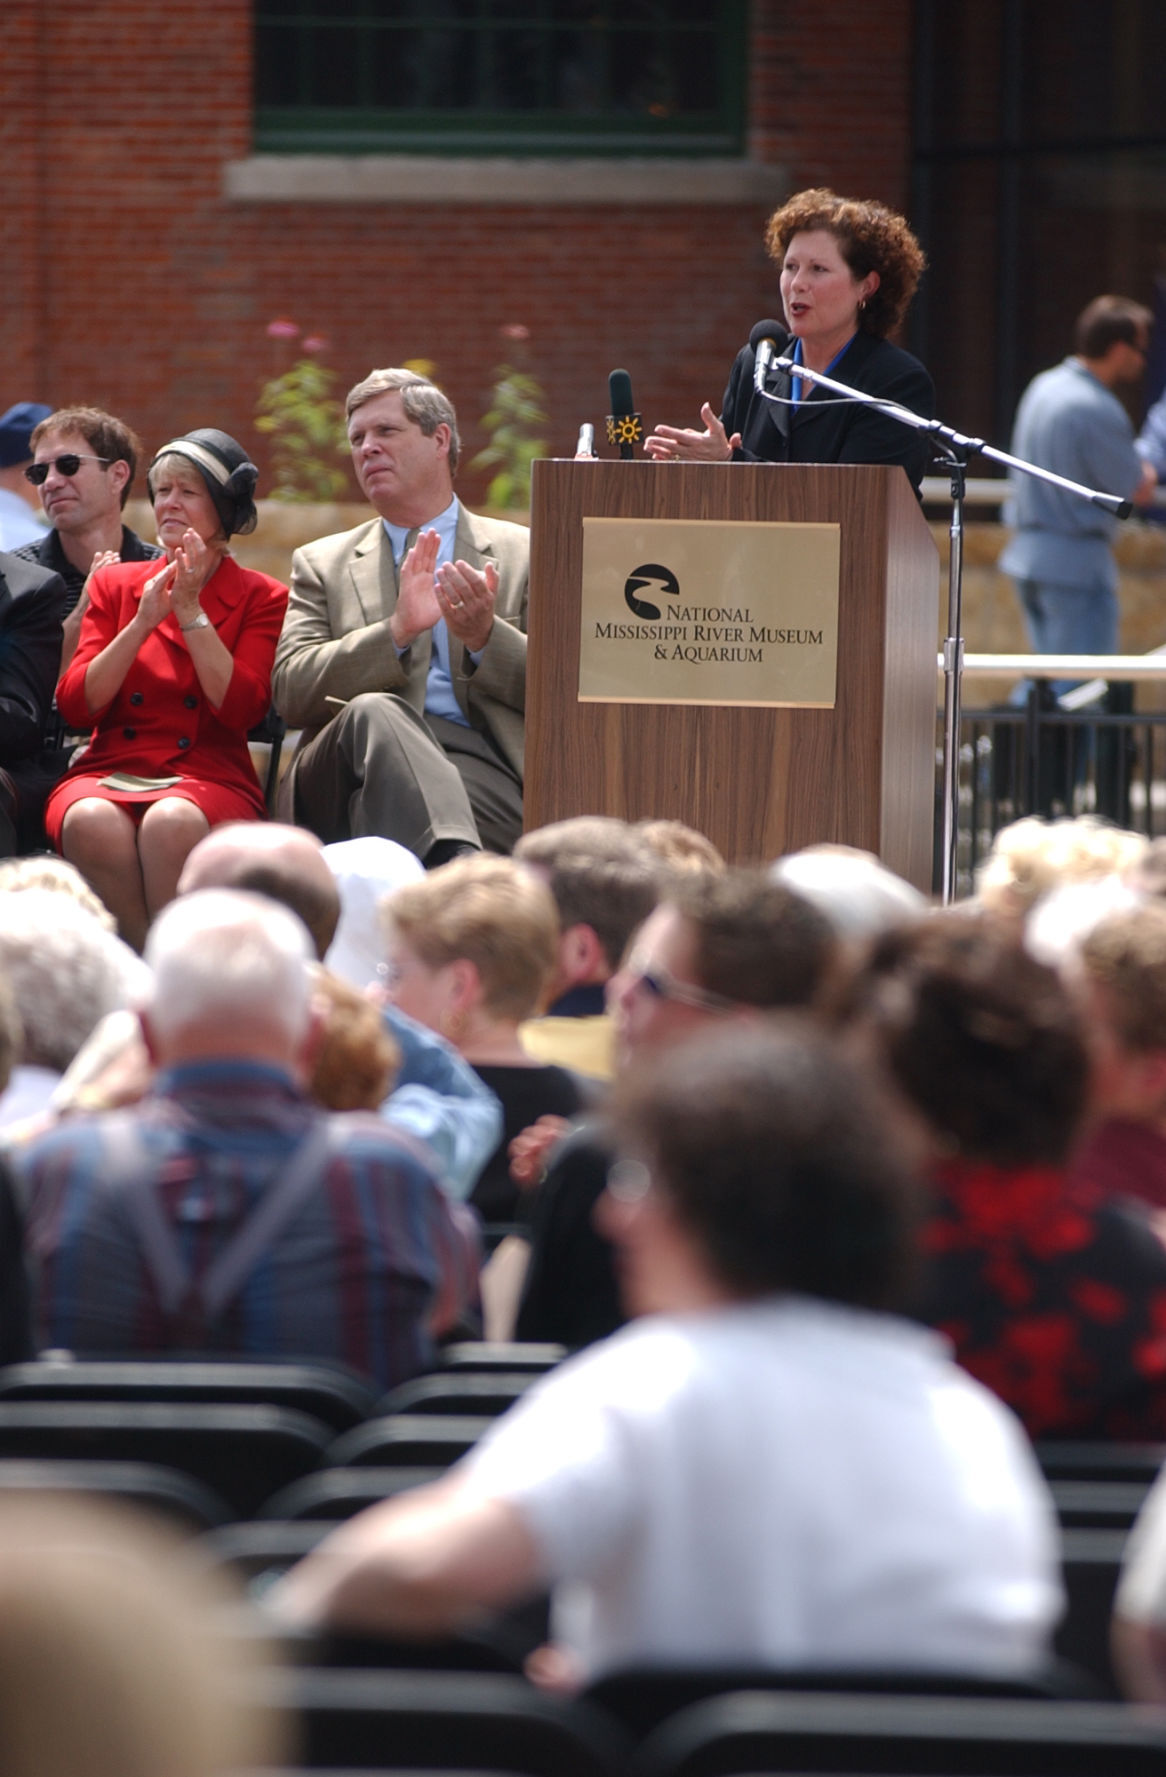 Development Director Teri Hawks Goodmann speaks during the Grand Opening Ceremony for the National Mississippi River Museum & Aquarium in 2003.    PHOTO CREDIT: File photo